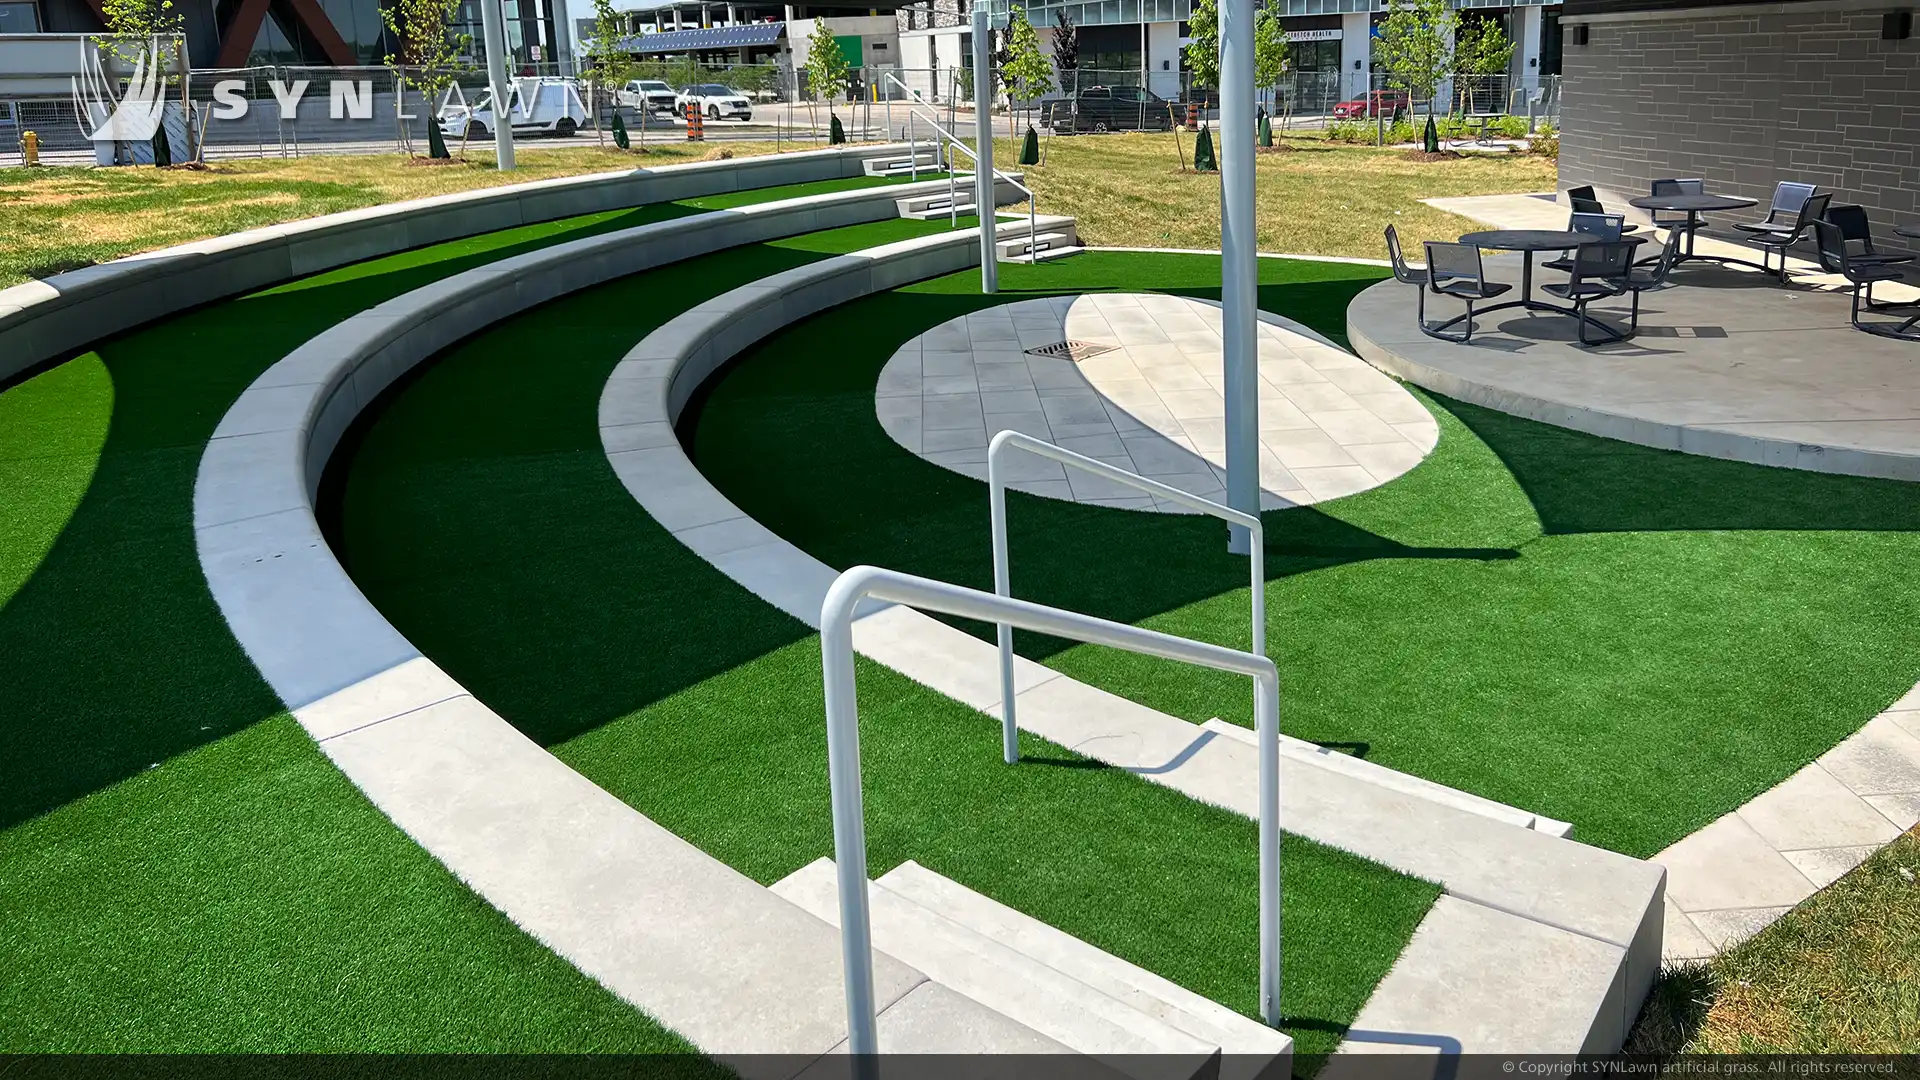 image of SYNLawn artificial grass at West 5 net zero community amphitheater London Toronto Ontario